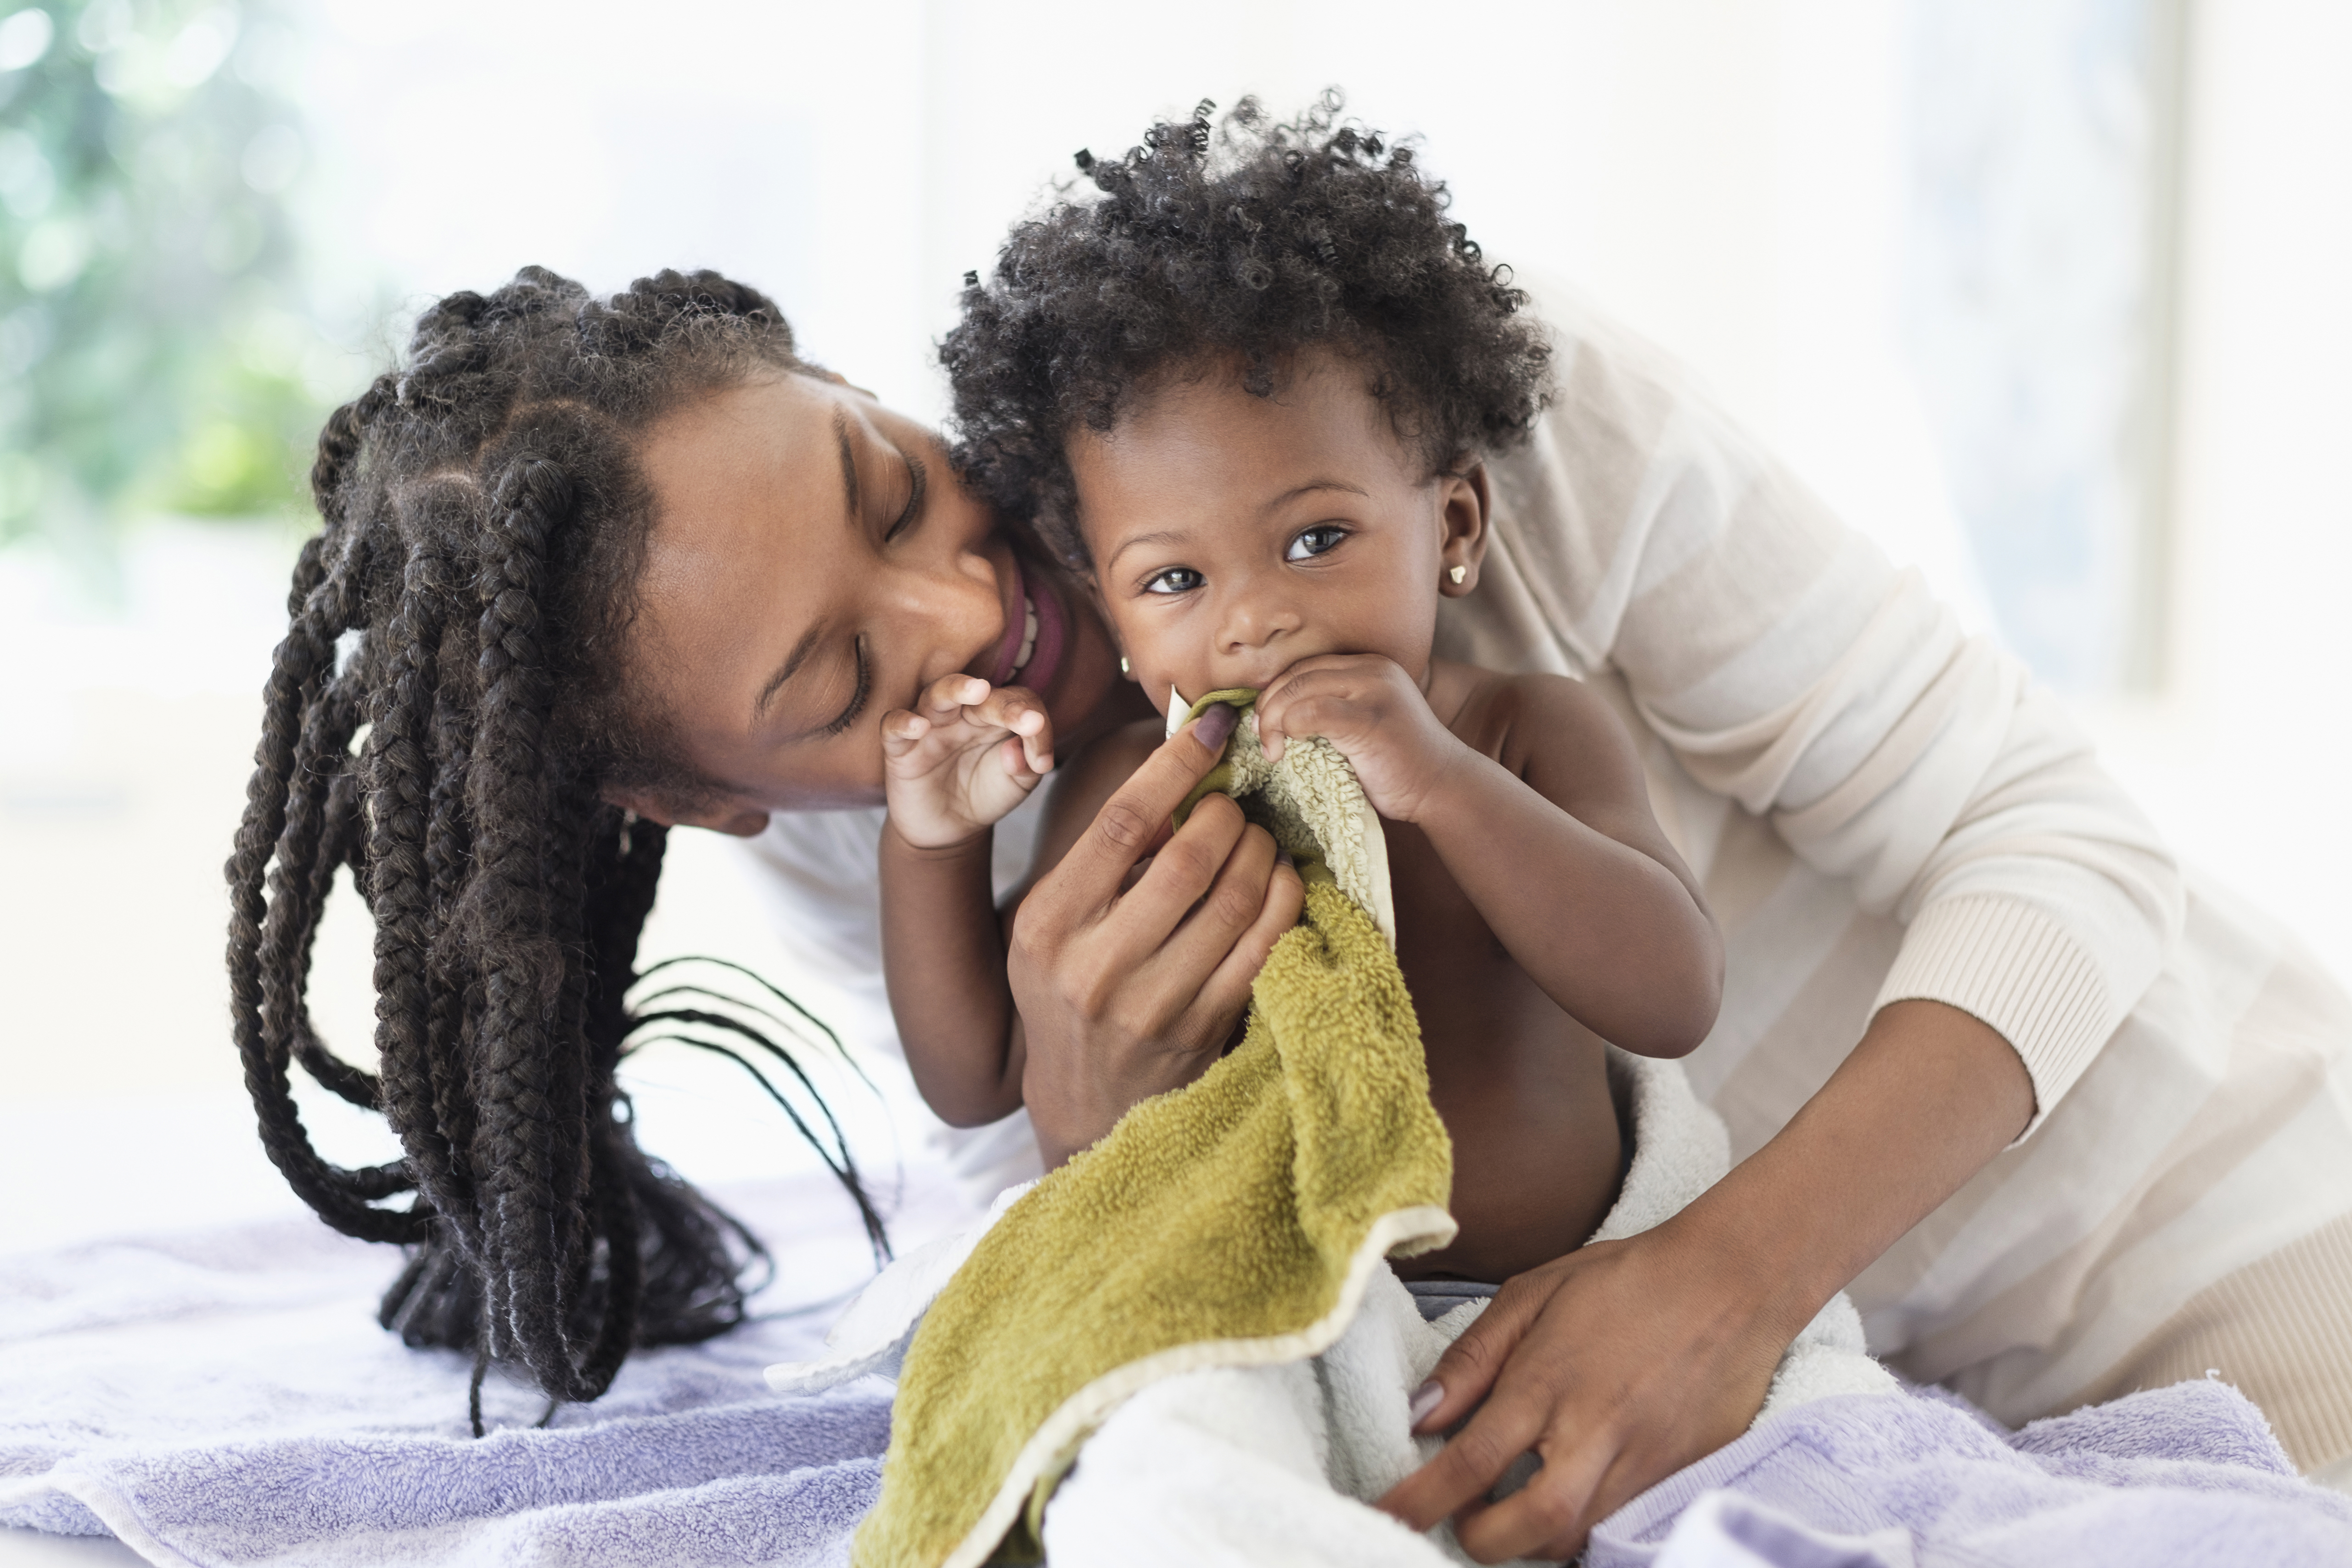 Black woman drying baby daughter with towels